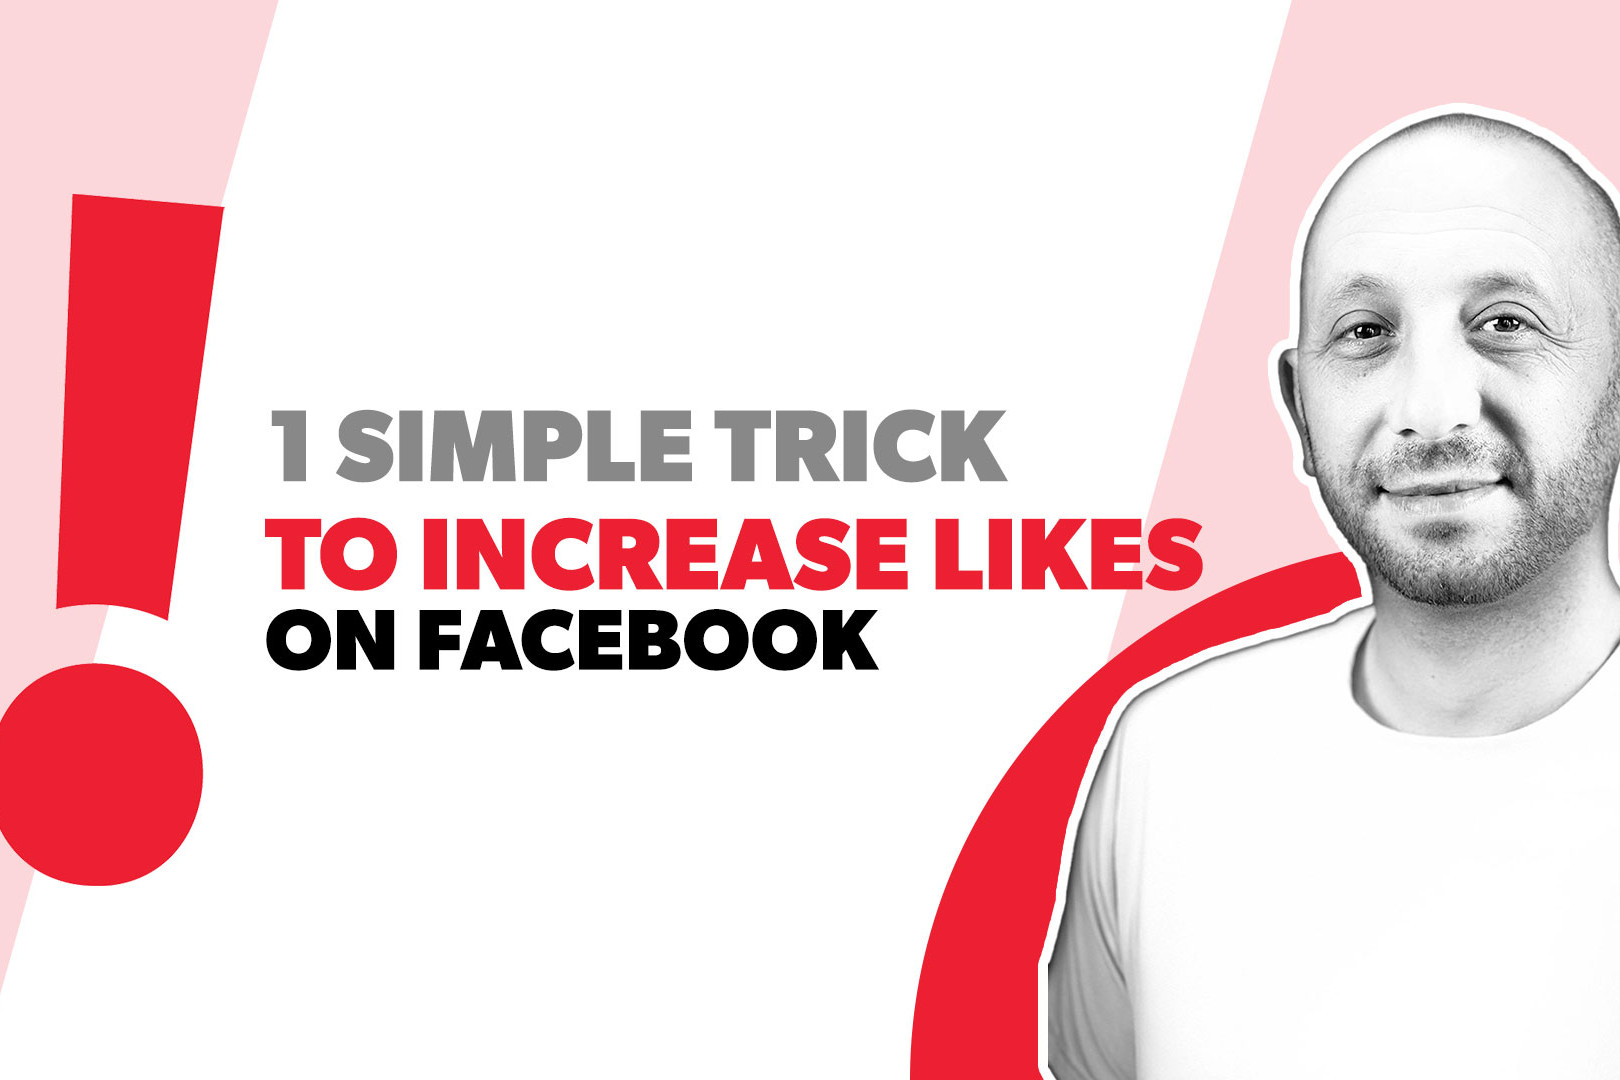 1 simple trick to increase facebook likes by levi guerra